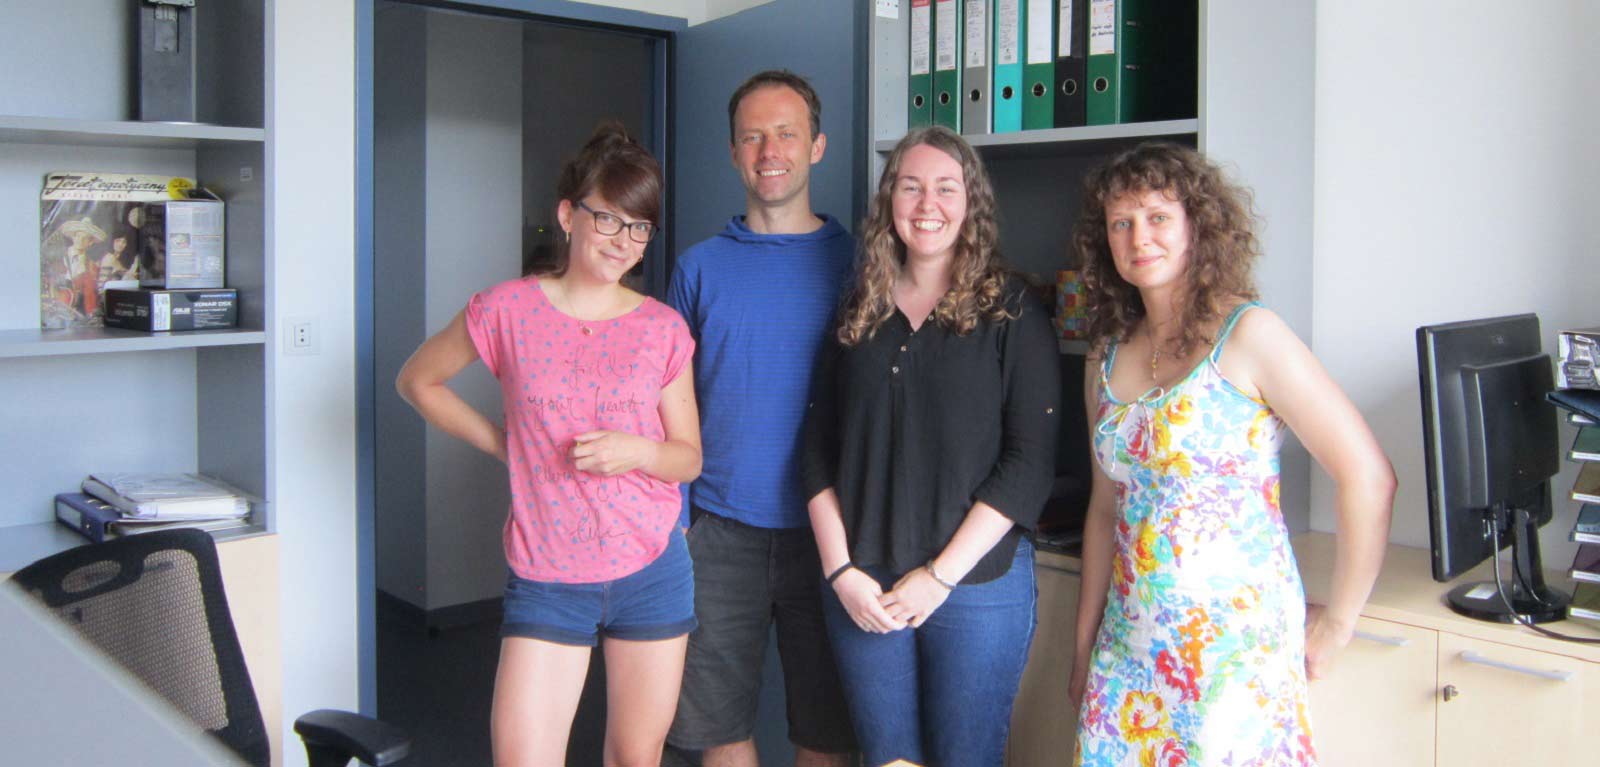 Group shot containing Psychology student Emma Jenks and others